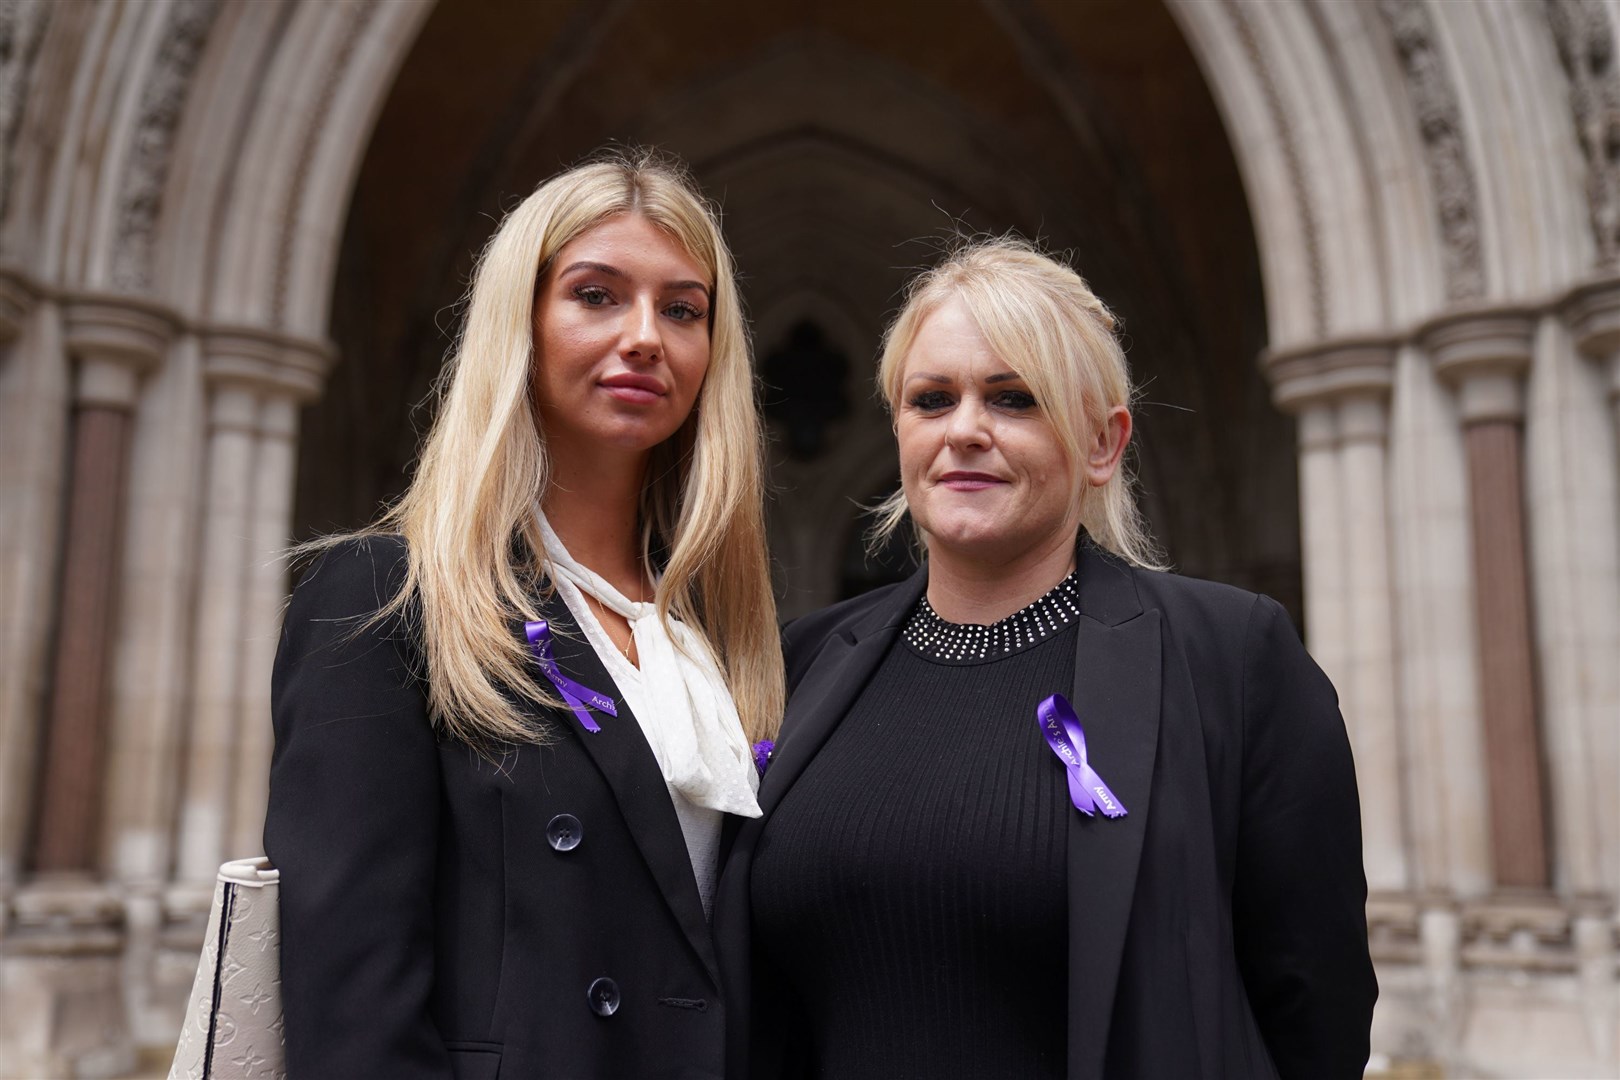 Archie Battersbee’s mother, Hollie Dance, right, with family friend Ella Carter outside the High Court in London (Kirsty O’Connor/PA)